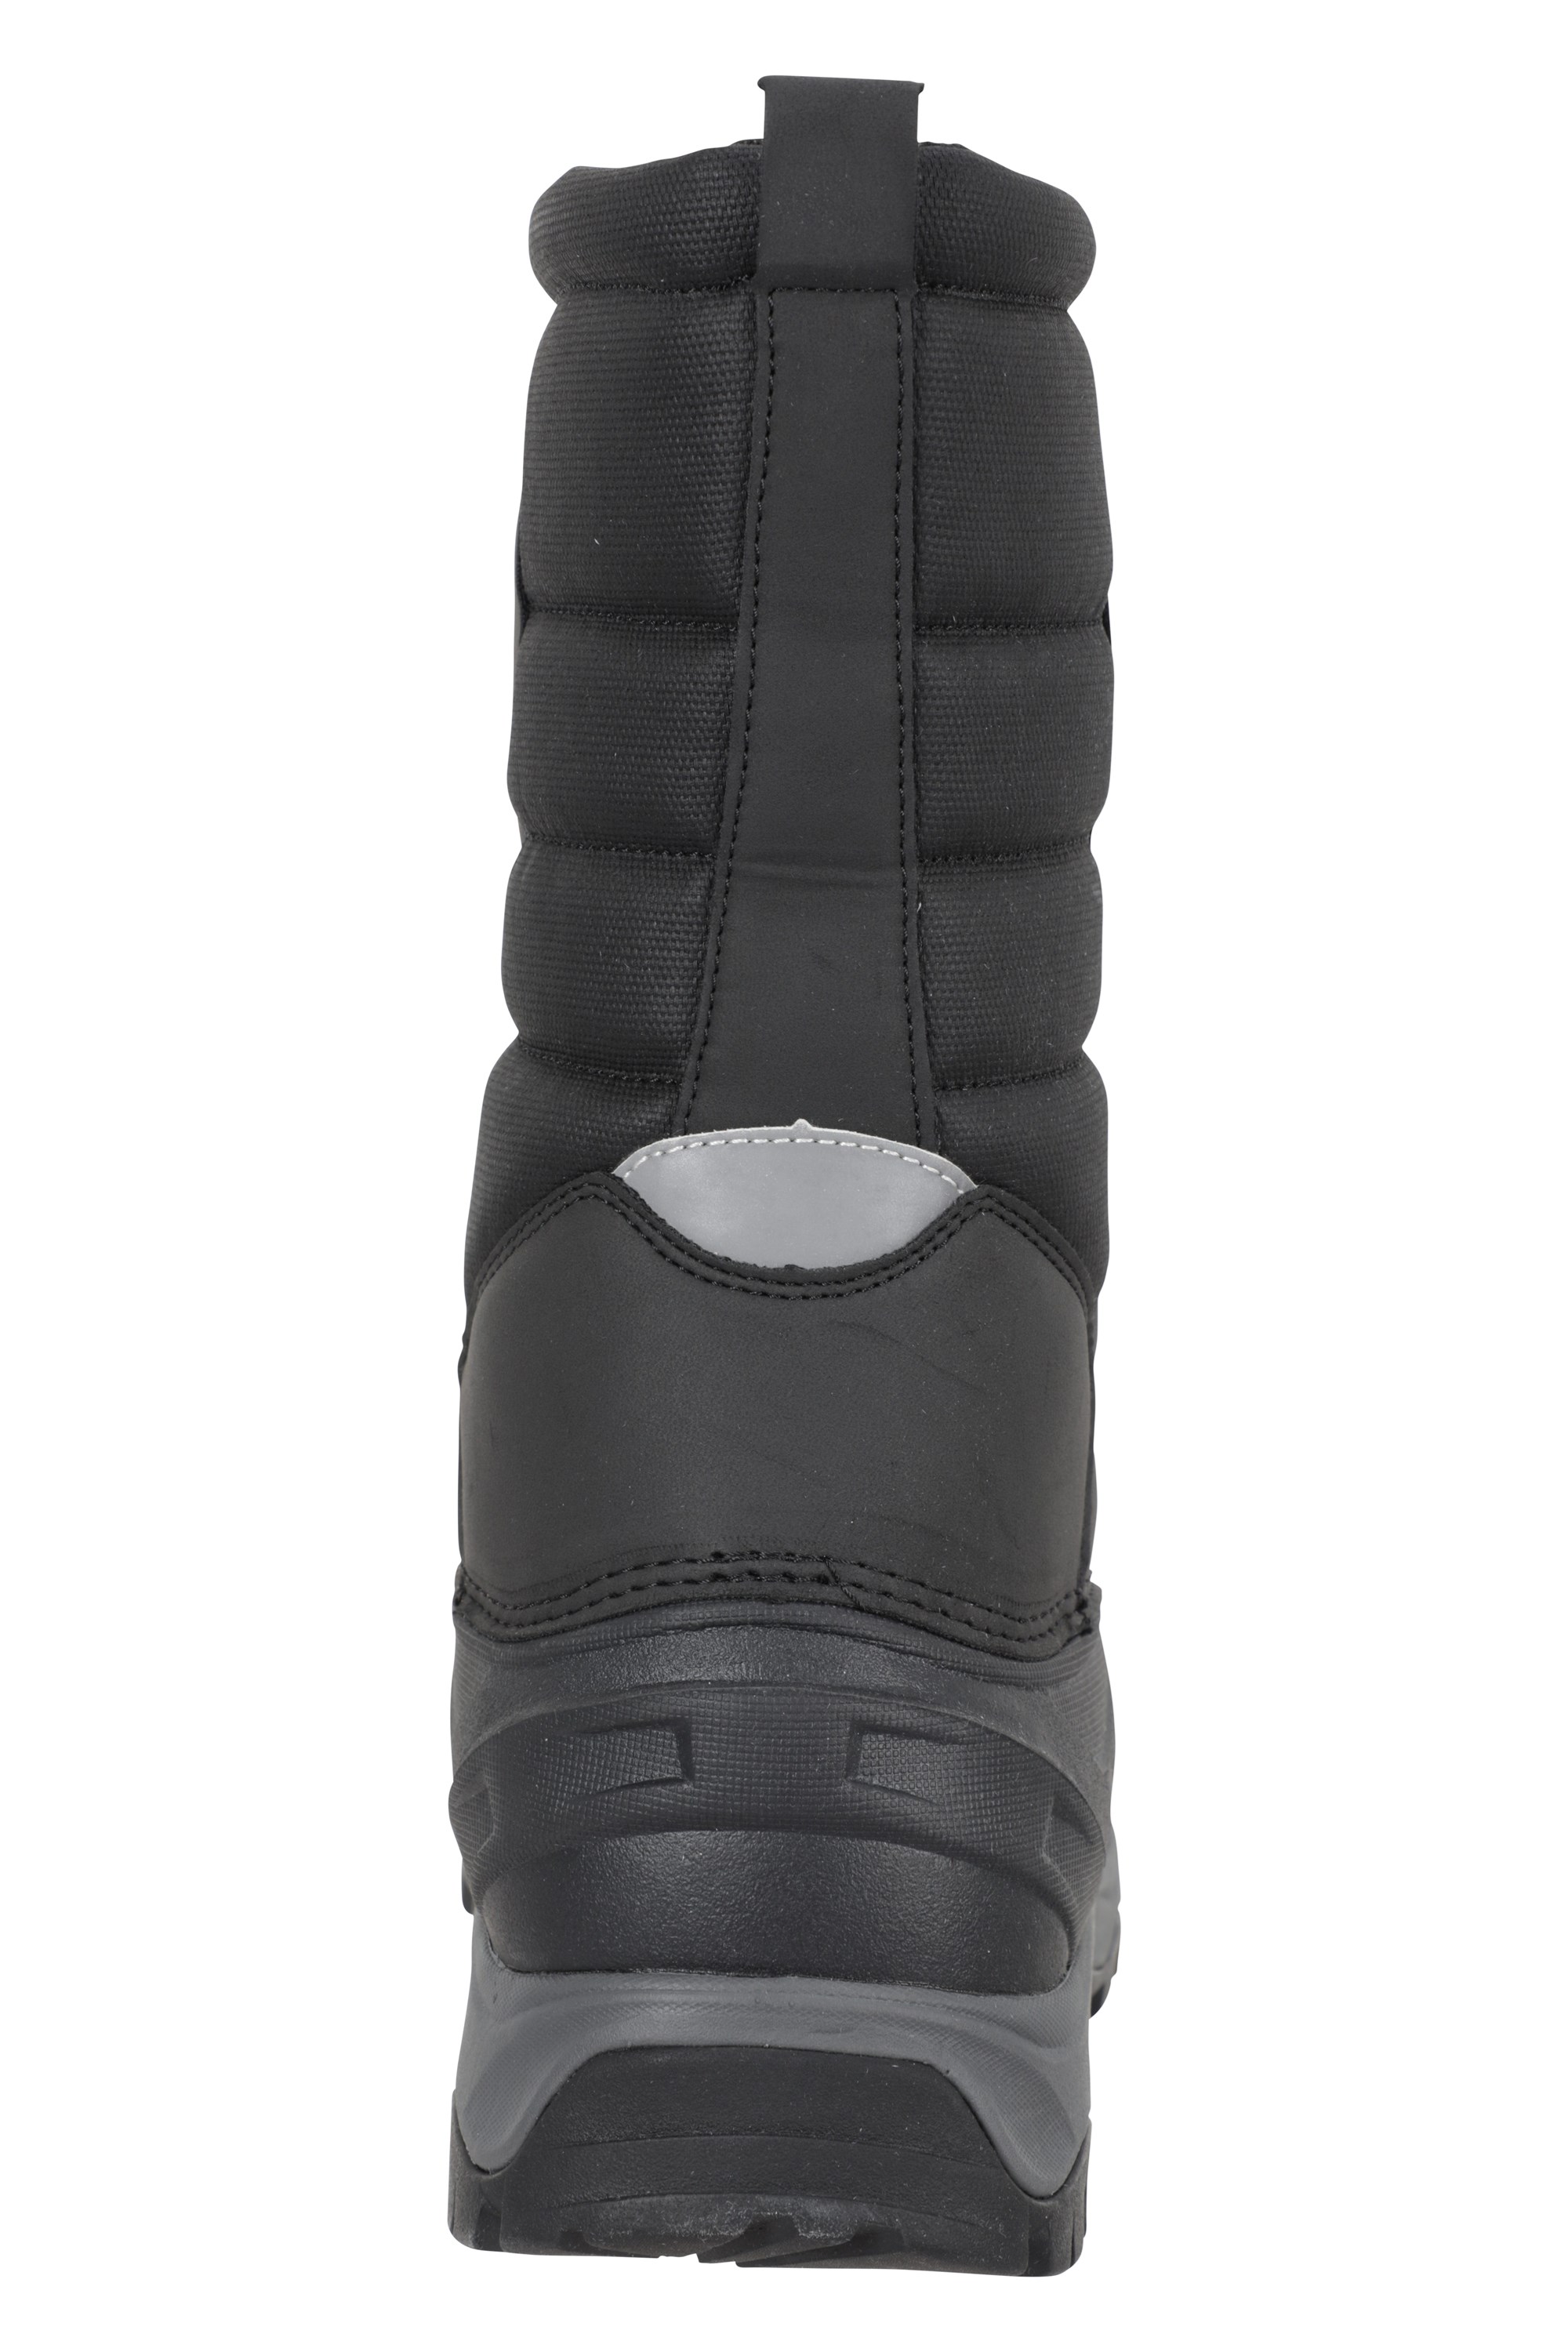 Nevis Extreme Mens Snow Boots | Mountain Warehouse CA